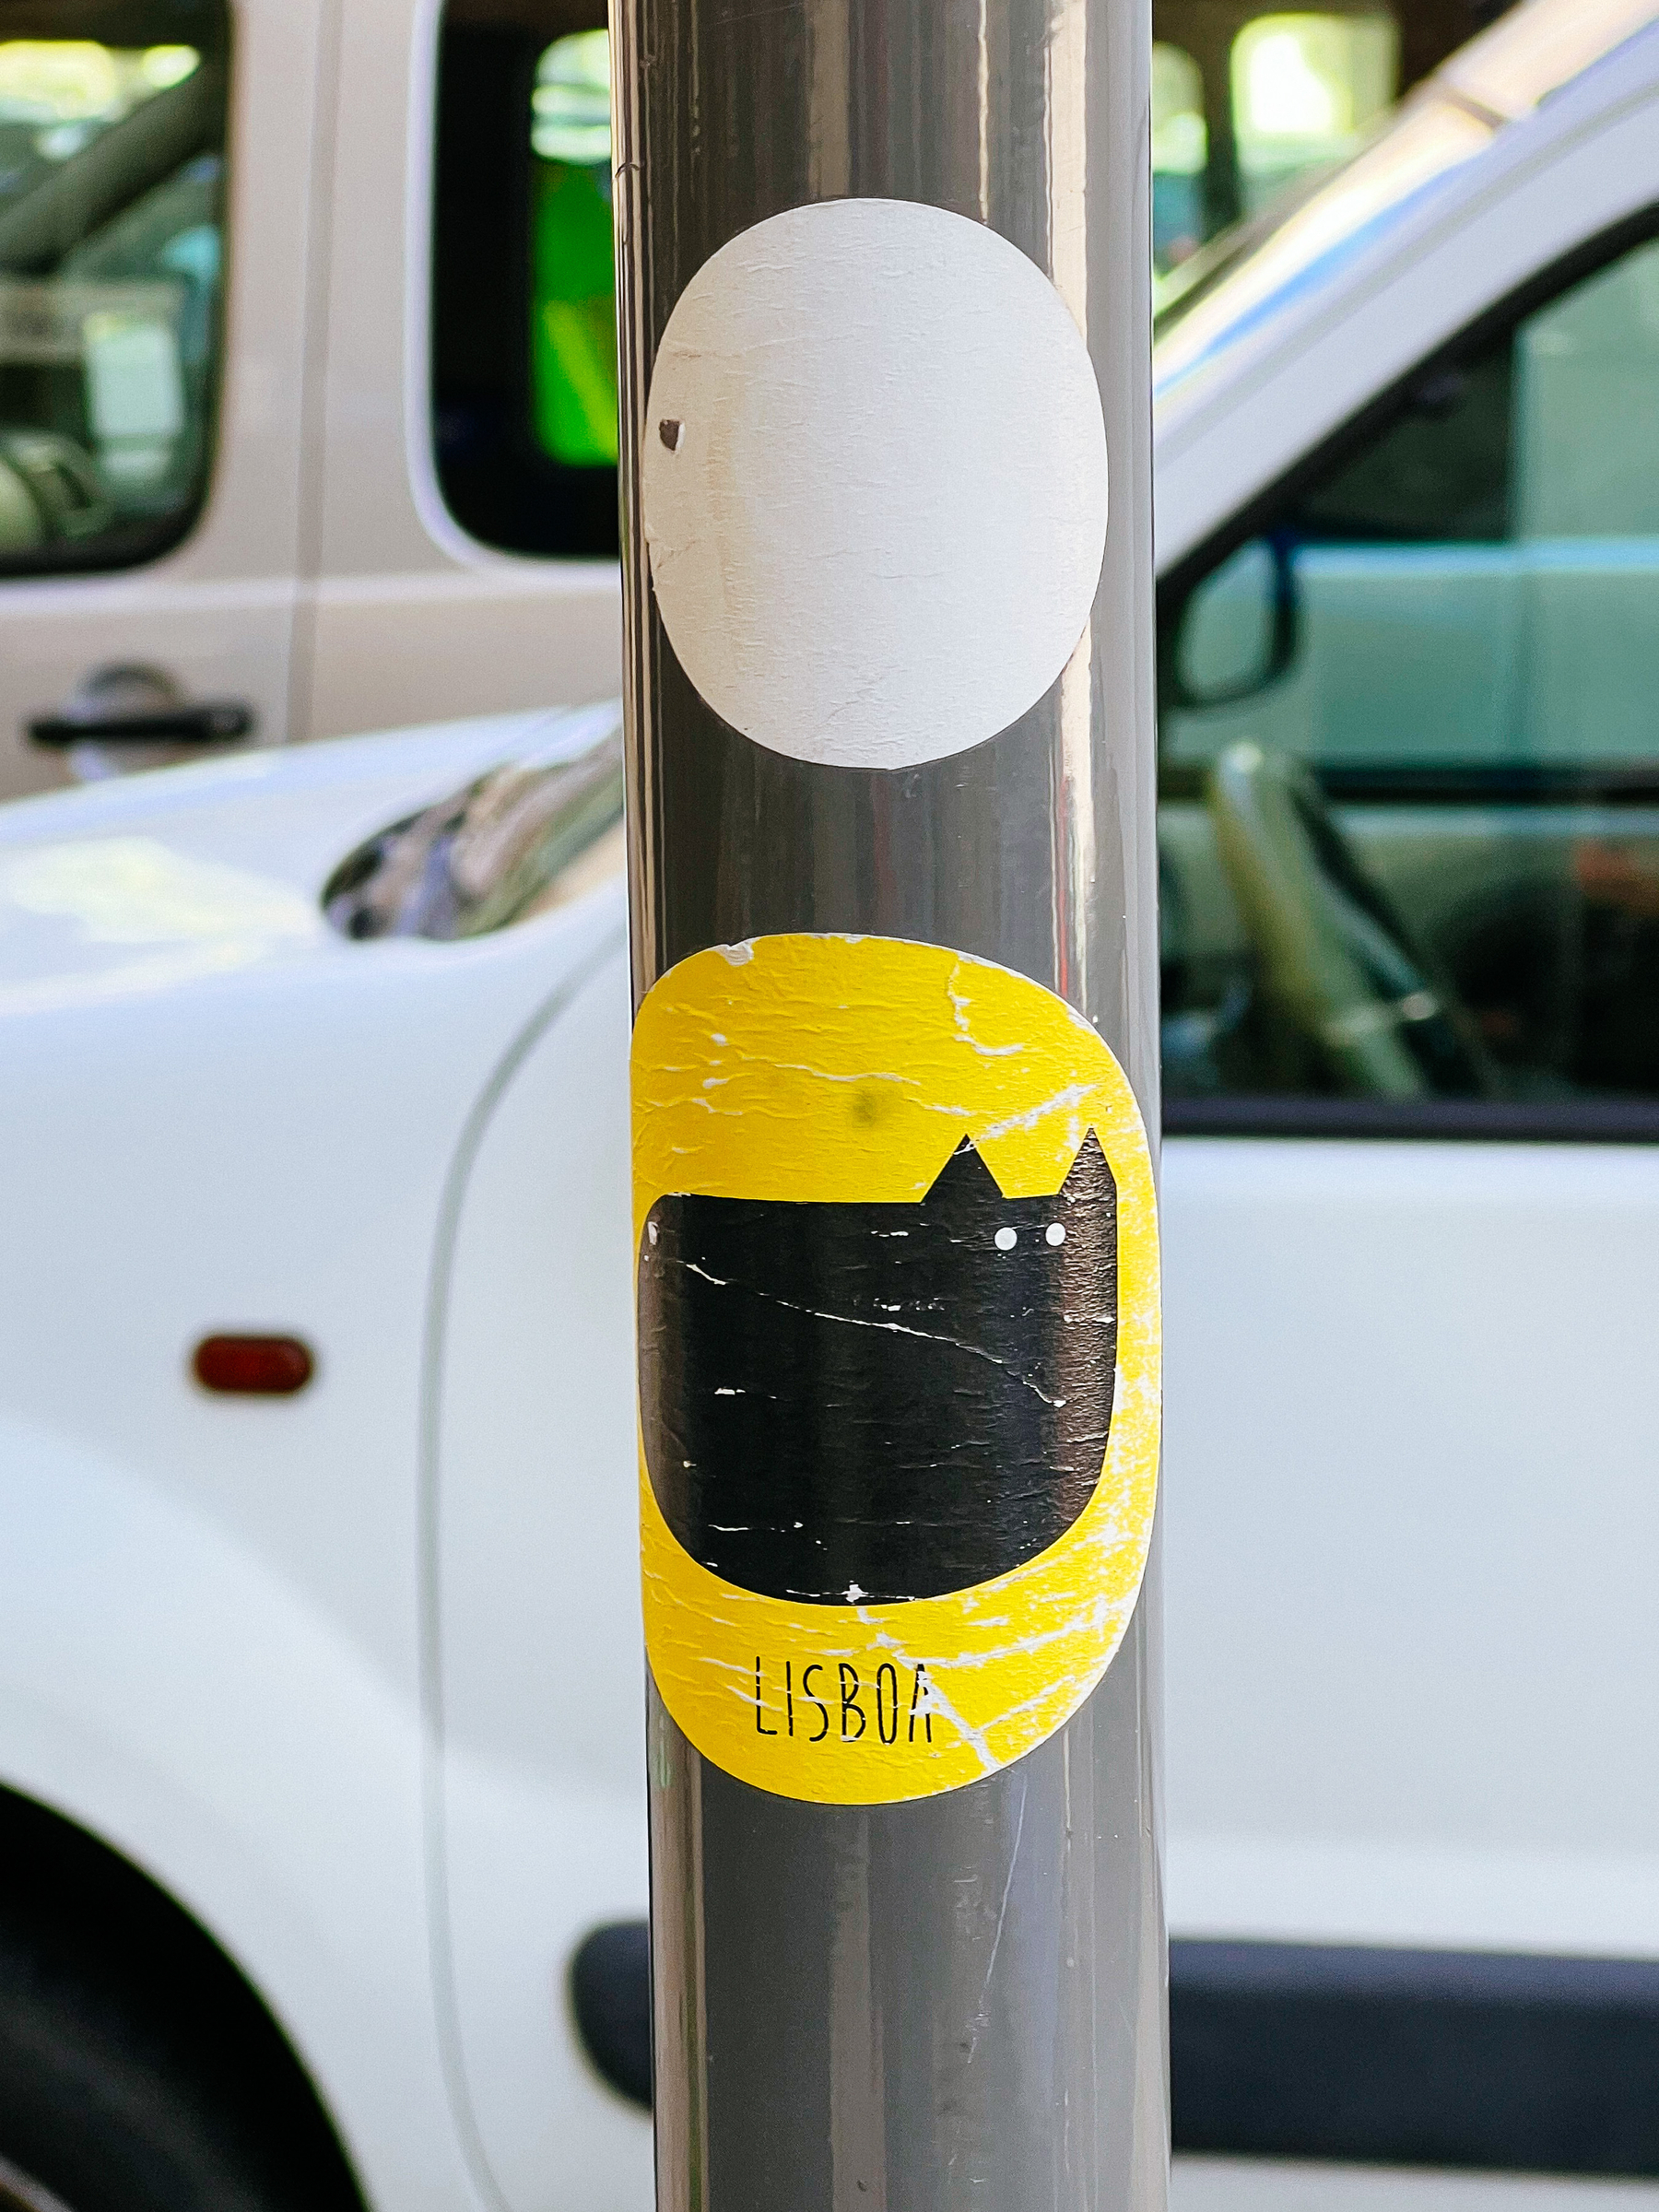 Sticker of a fat black cat with the word “Lisbon”